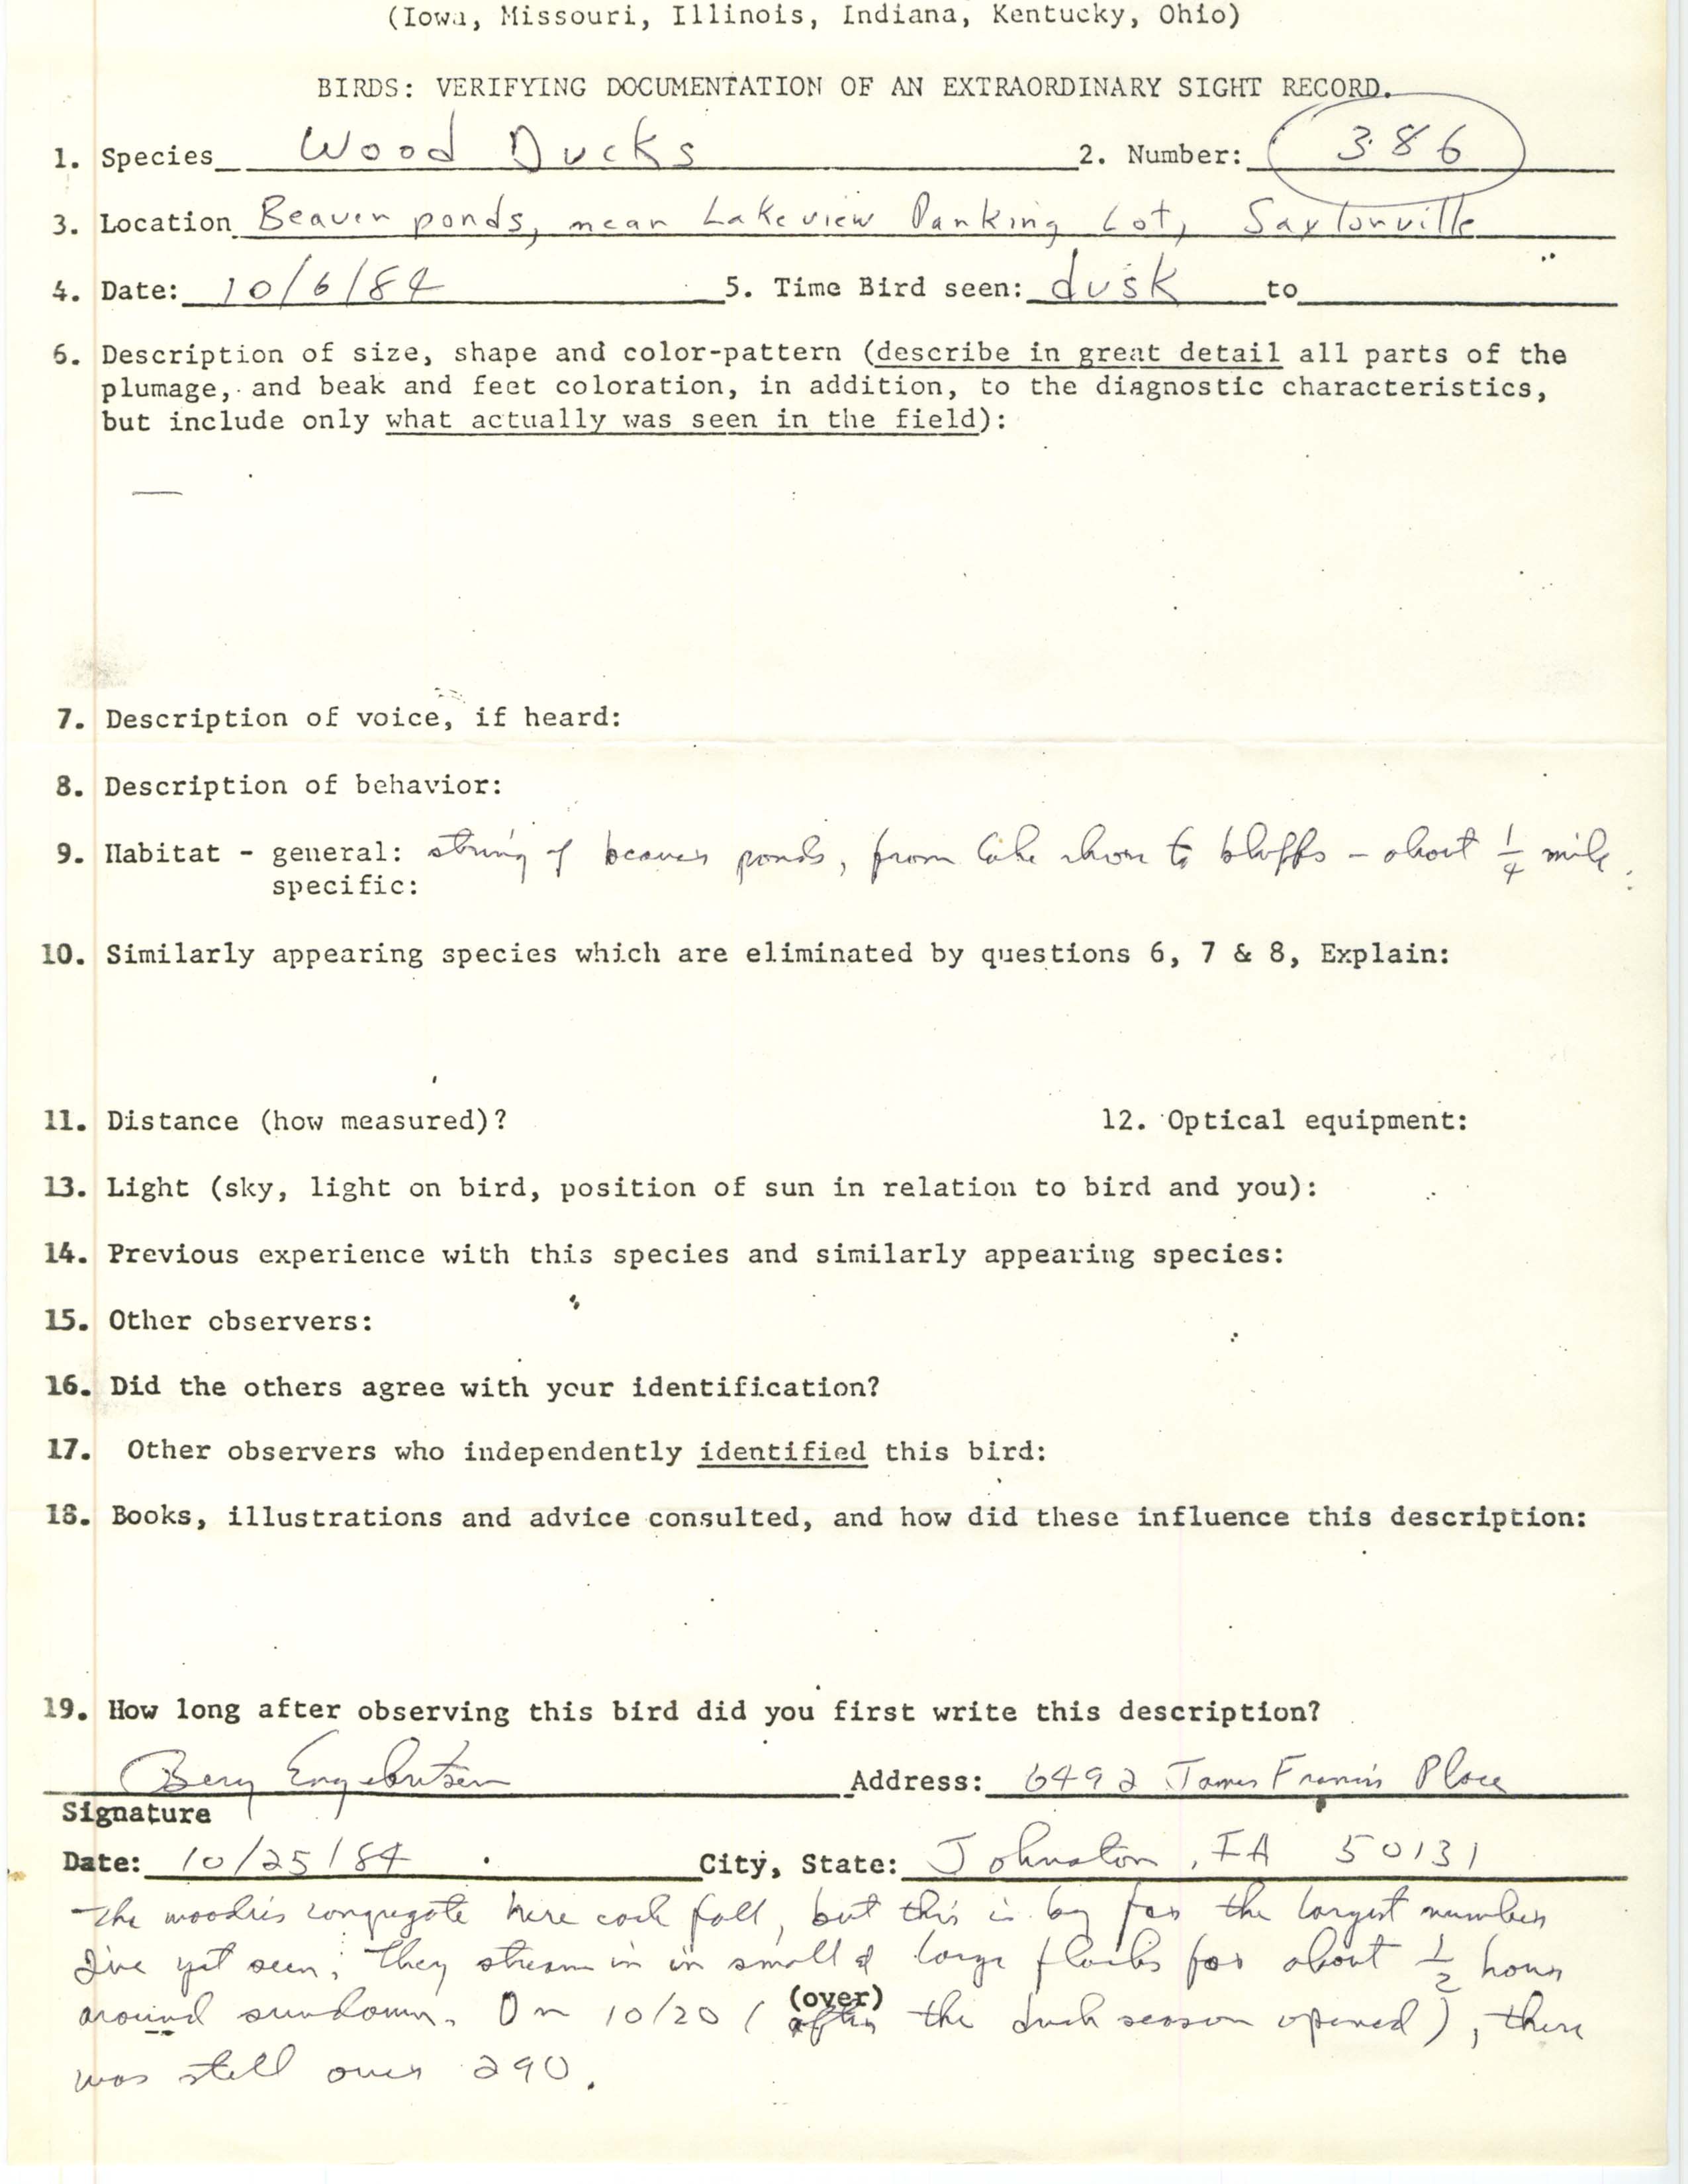 Rare bird documentation form for Wood Duck at Lakeview Recreation Area at Saylorville Lake in 1984